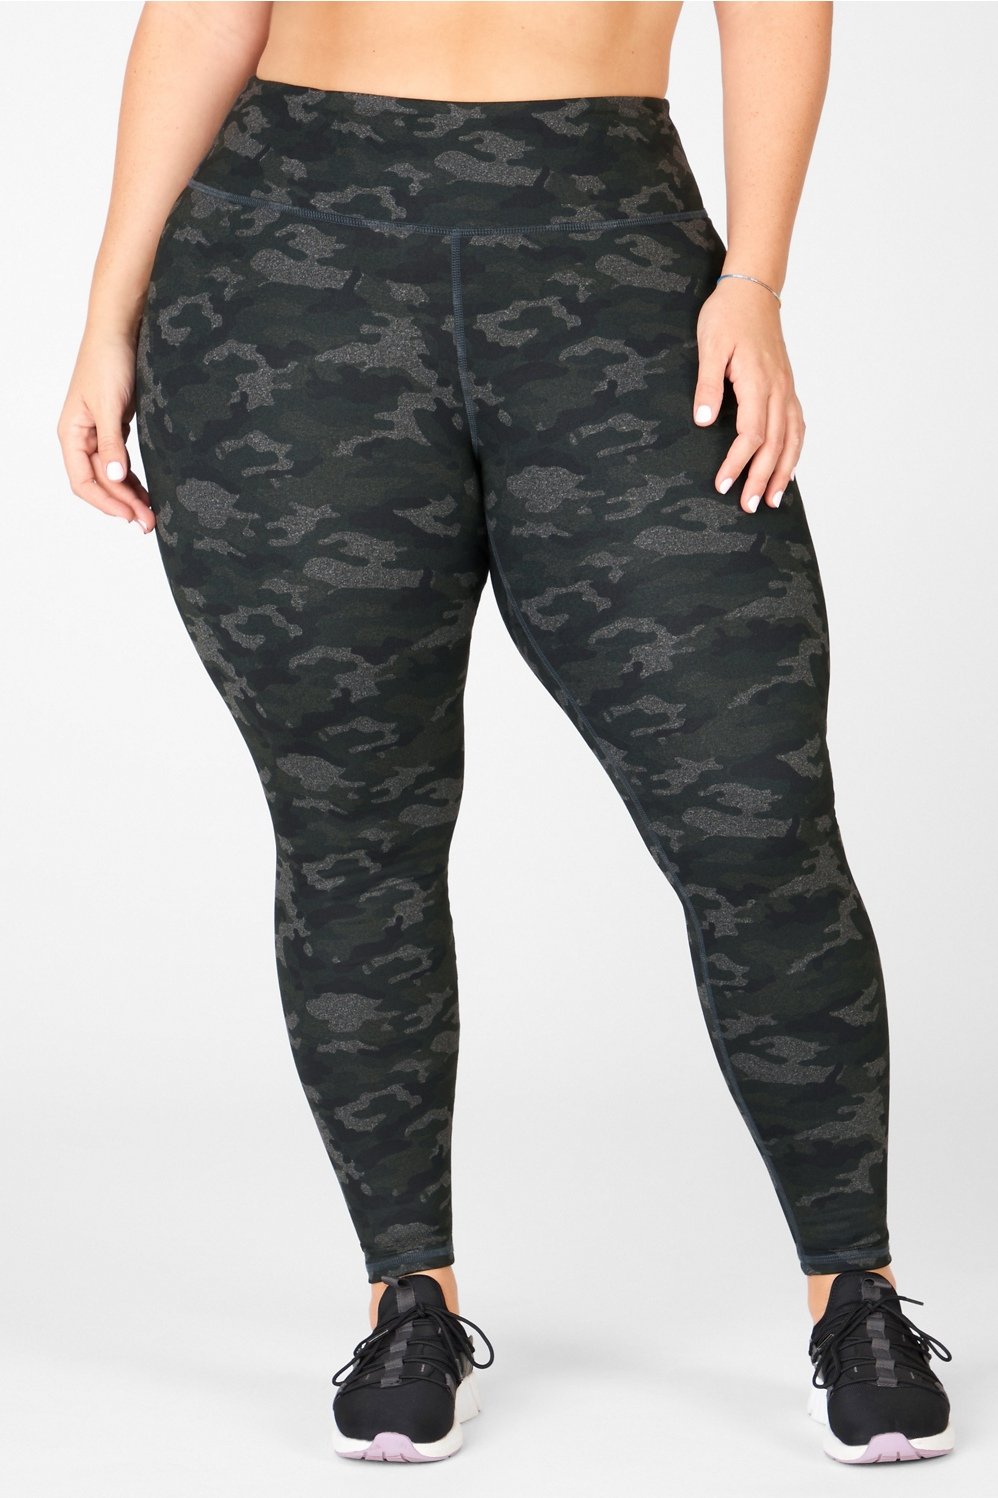 Basic Editions Leggings For Women  International Society of Precision  Agriculture